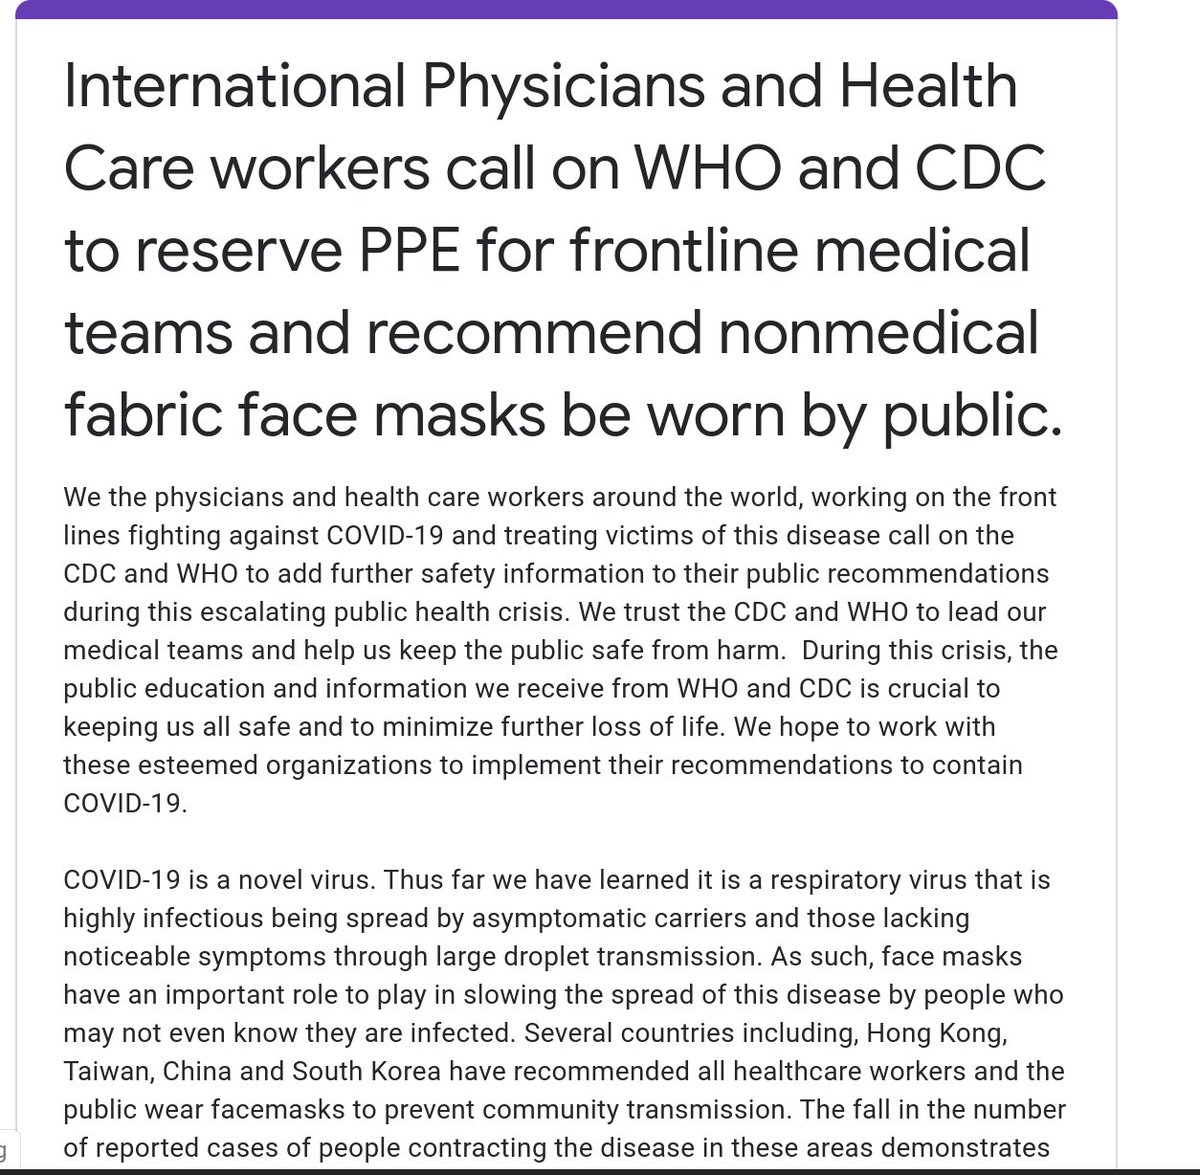 Health care workers! Please consider signing this petition asking for CDC and the WHO to give clear, evidence-based guidance on masks. Every person who's not infected is one less patient you have to care for during this time. Folks, feel free to share.  https://www.medwiser.org/sign-petition-international-physicians-and-health-care-workers-call-on-who-and-cdc-to-reserve-ppe-for-frontline-medical-teams-and-recommend-nonmedical-fabric-face-masks-be-worn-by-public/